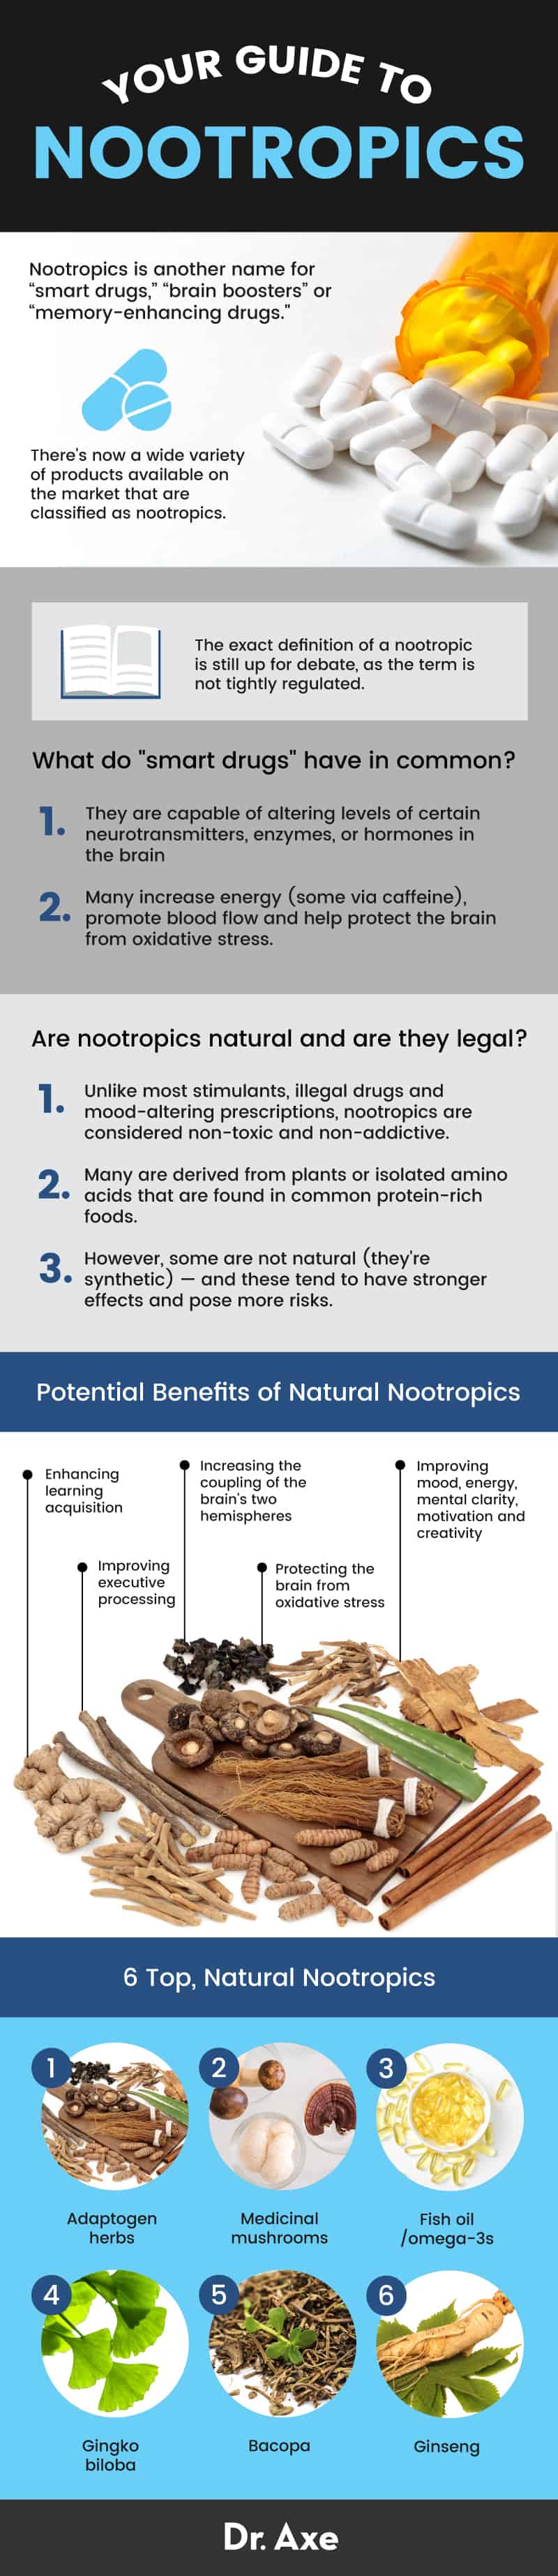 Nootropics uses - Dr. Axe